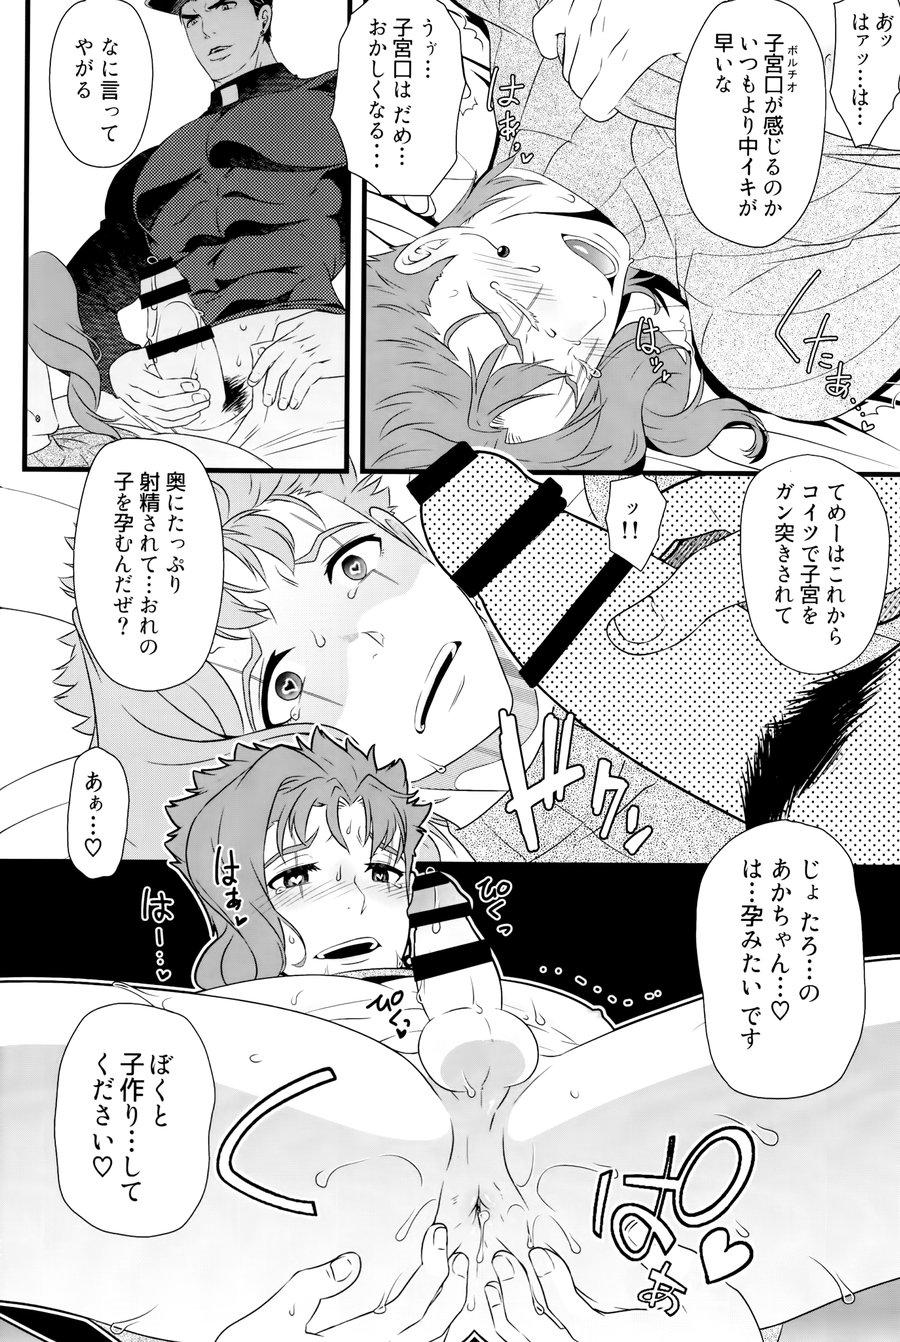 Cum Eating Trapped in a Room Until We Make a Baby - Jojos bizarre adventure | jojo no kimyou na bouken Cute - Page 7